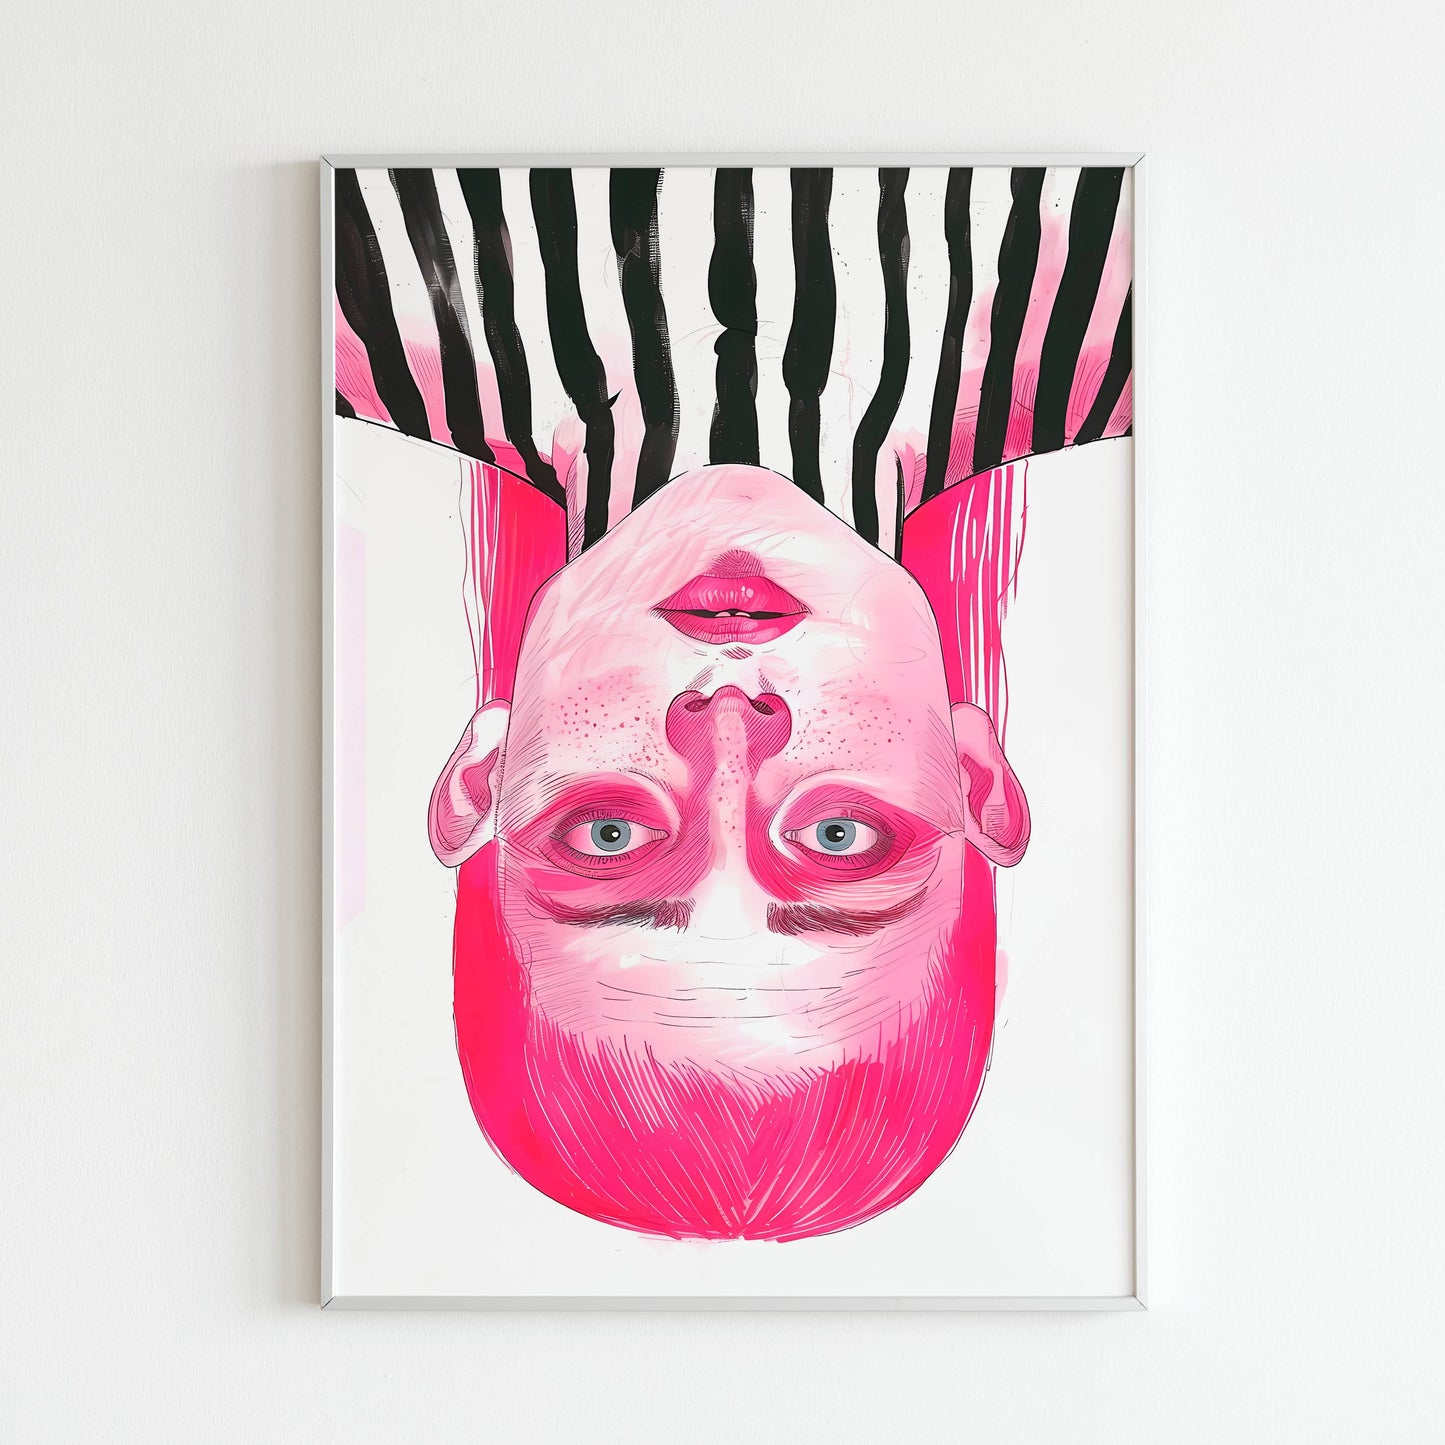 Experience a unique perspective with an inverted portrait in pink tones (physical or digital)